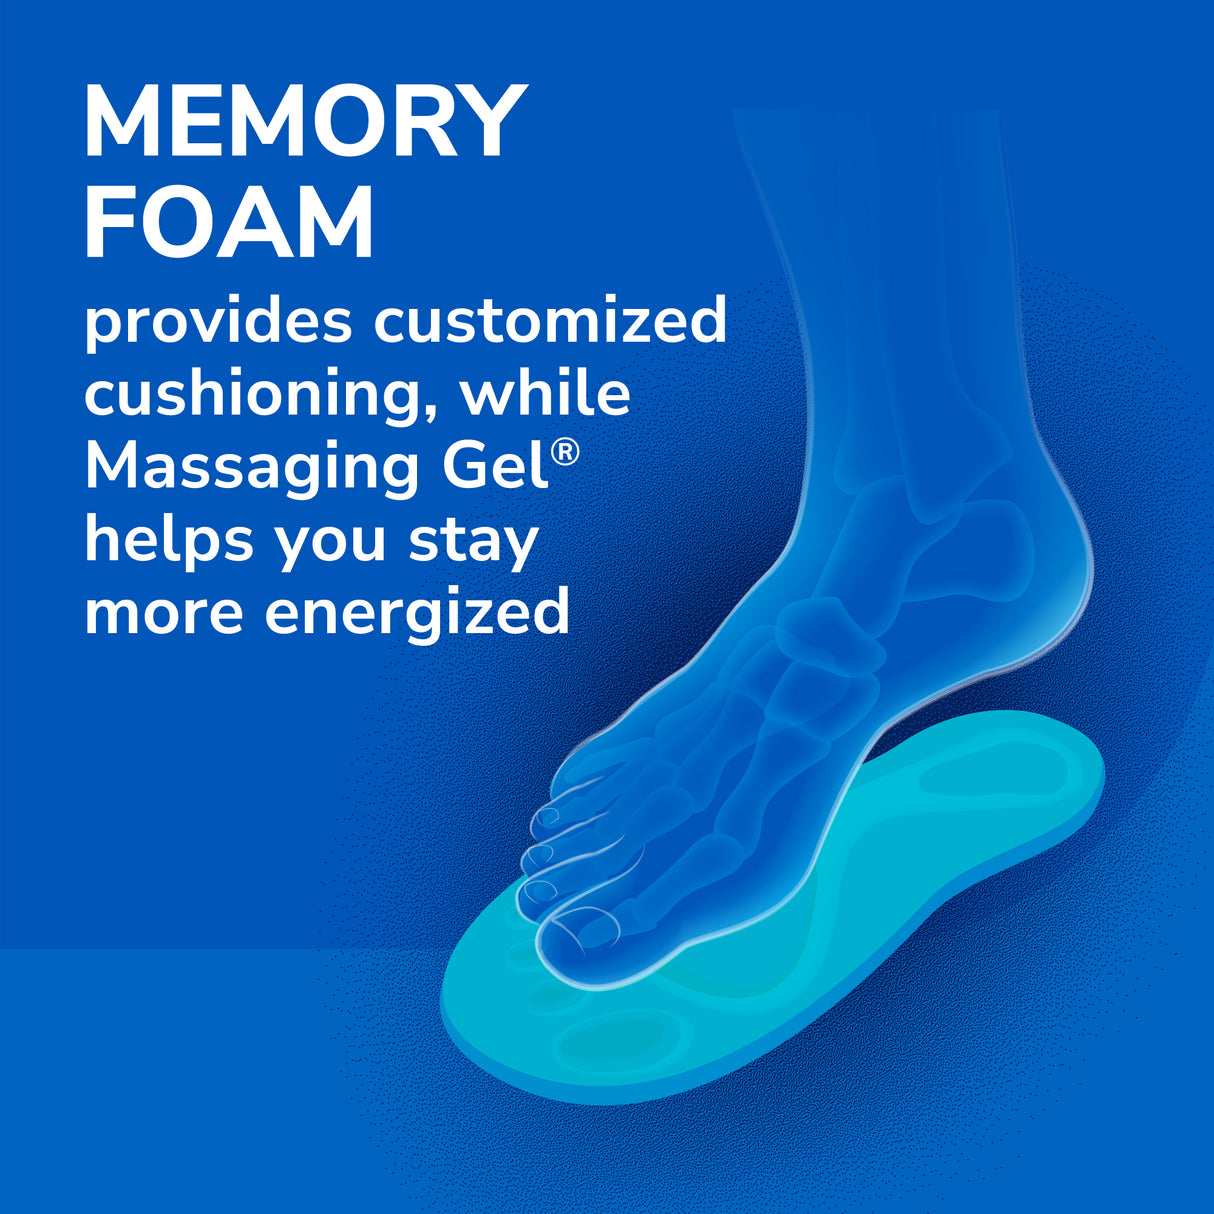 image of memory foam provides customized cushioning, while massaging gel helps you stay more energized